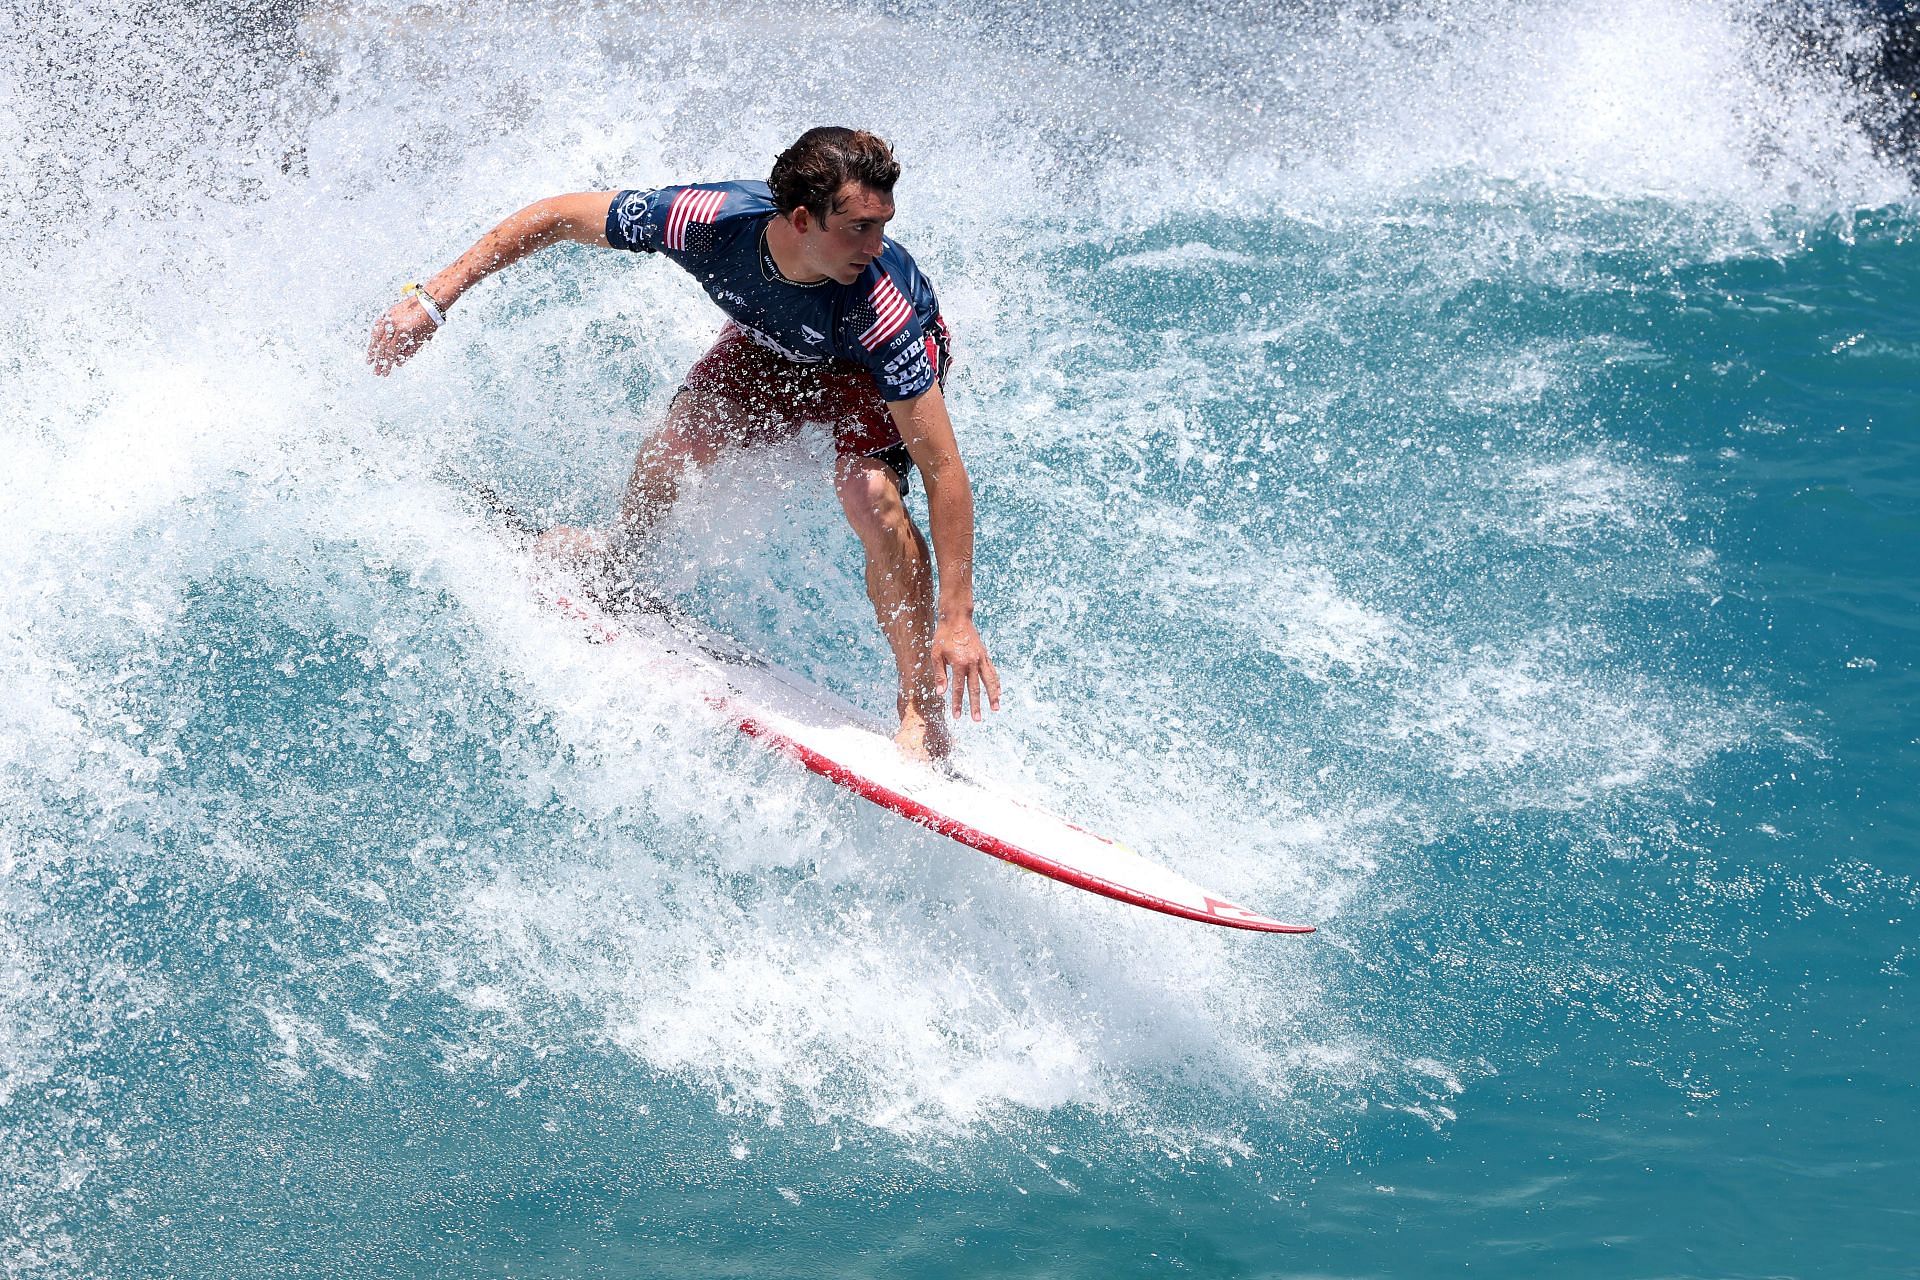 Griffin Colapinto at Surf Ranch Pro